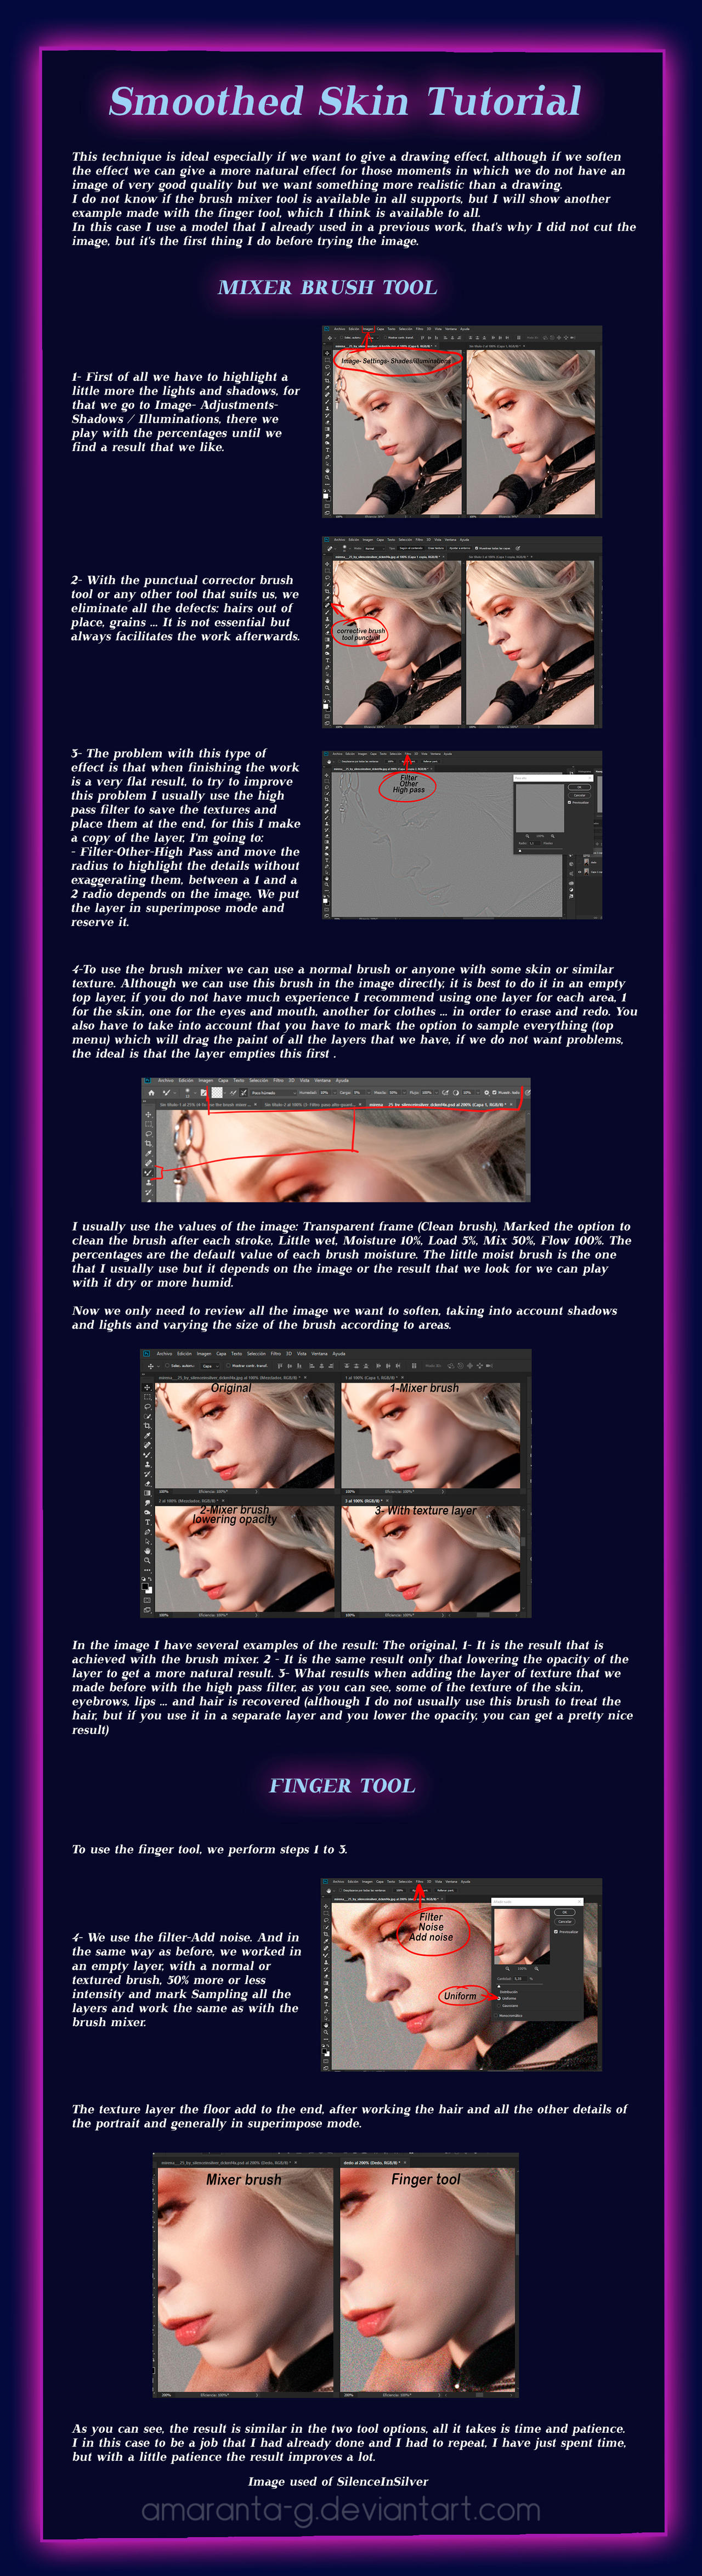 Smoothed Skin Tutorial